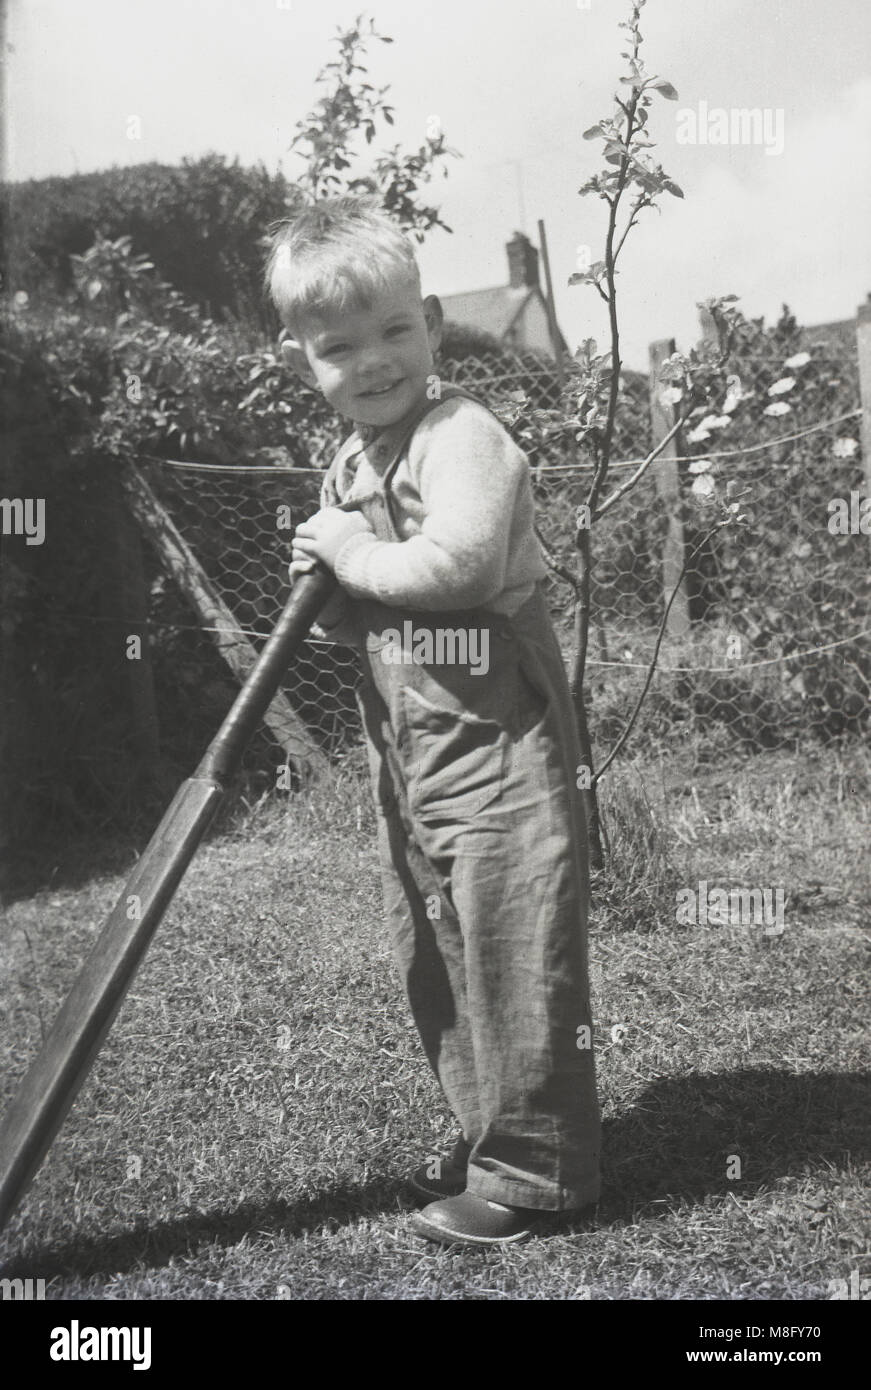 1950, historical, summertime and outside in a back garden, a young boy holding onto an old cricket bat, England, UK. Stock Photo